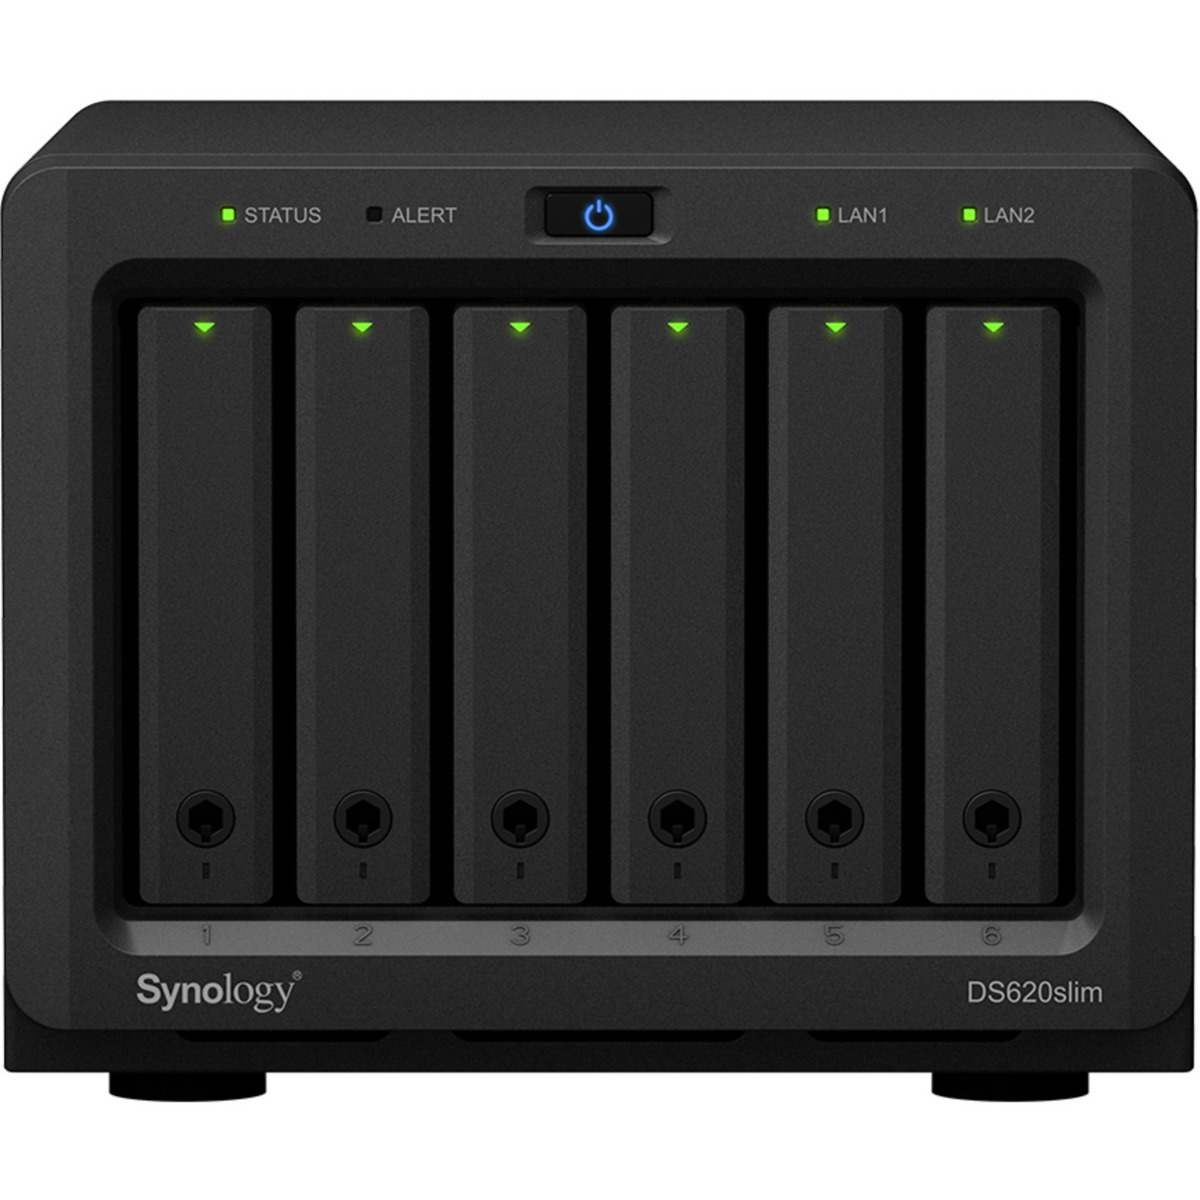 buy Synology DiskStation DS620slim Desktop NAS - Network Attached Storage Device Burn-In Tested Configurations - FREE RAM UPGRADE - nas headquarters buy network attached storage server device das new raid-5 free shipping usa DiskStation DS620slim